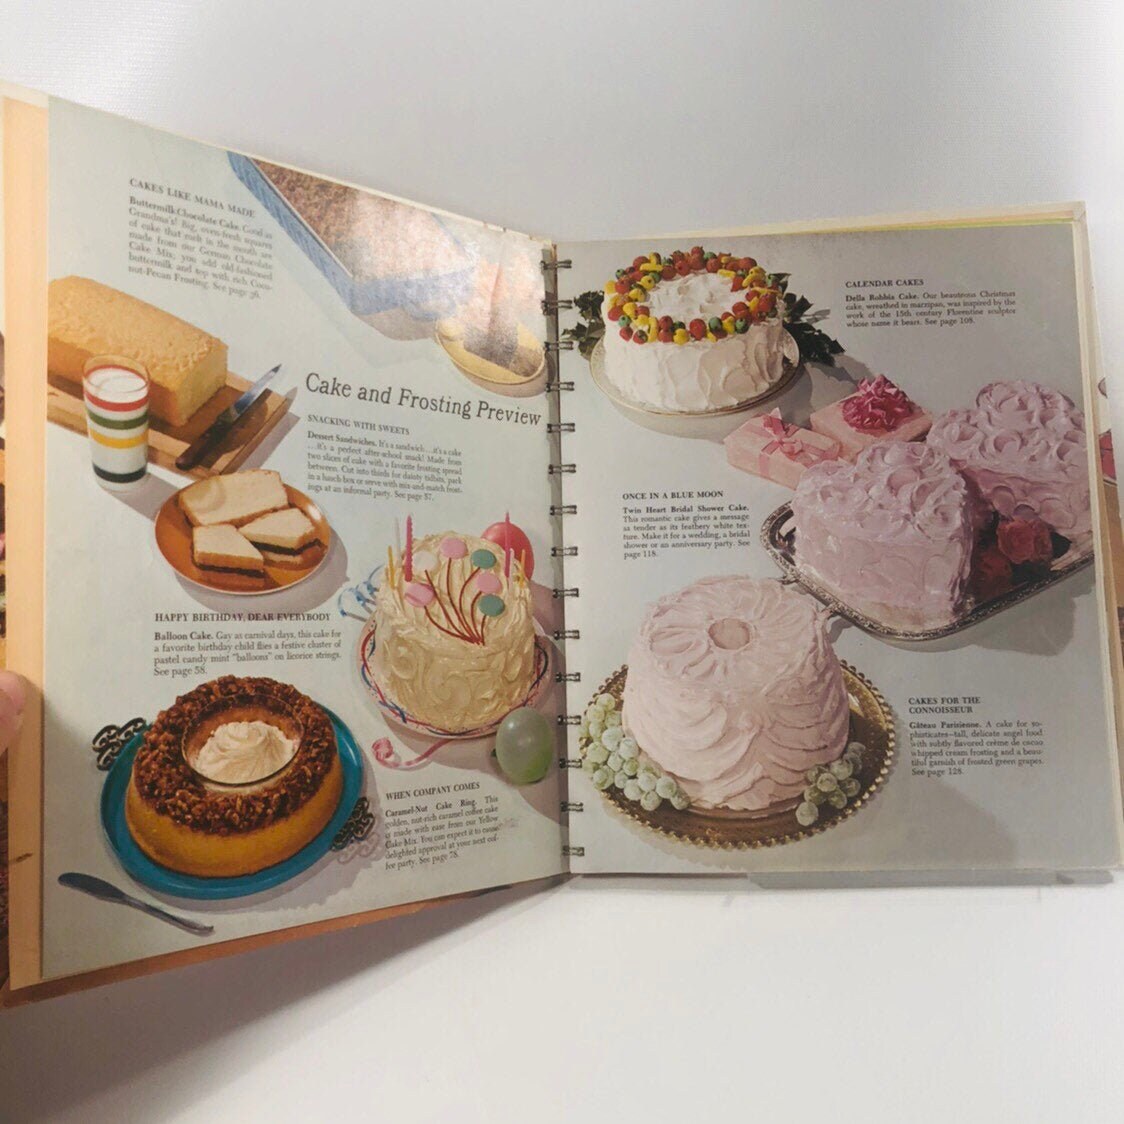 Betty Crocker Cake and Frosting Cookbook First Edition 1966 Golden Press A Vintage Cookbook with Great Recipes